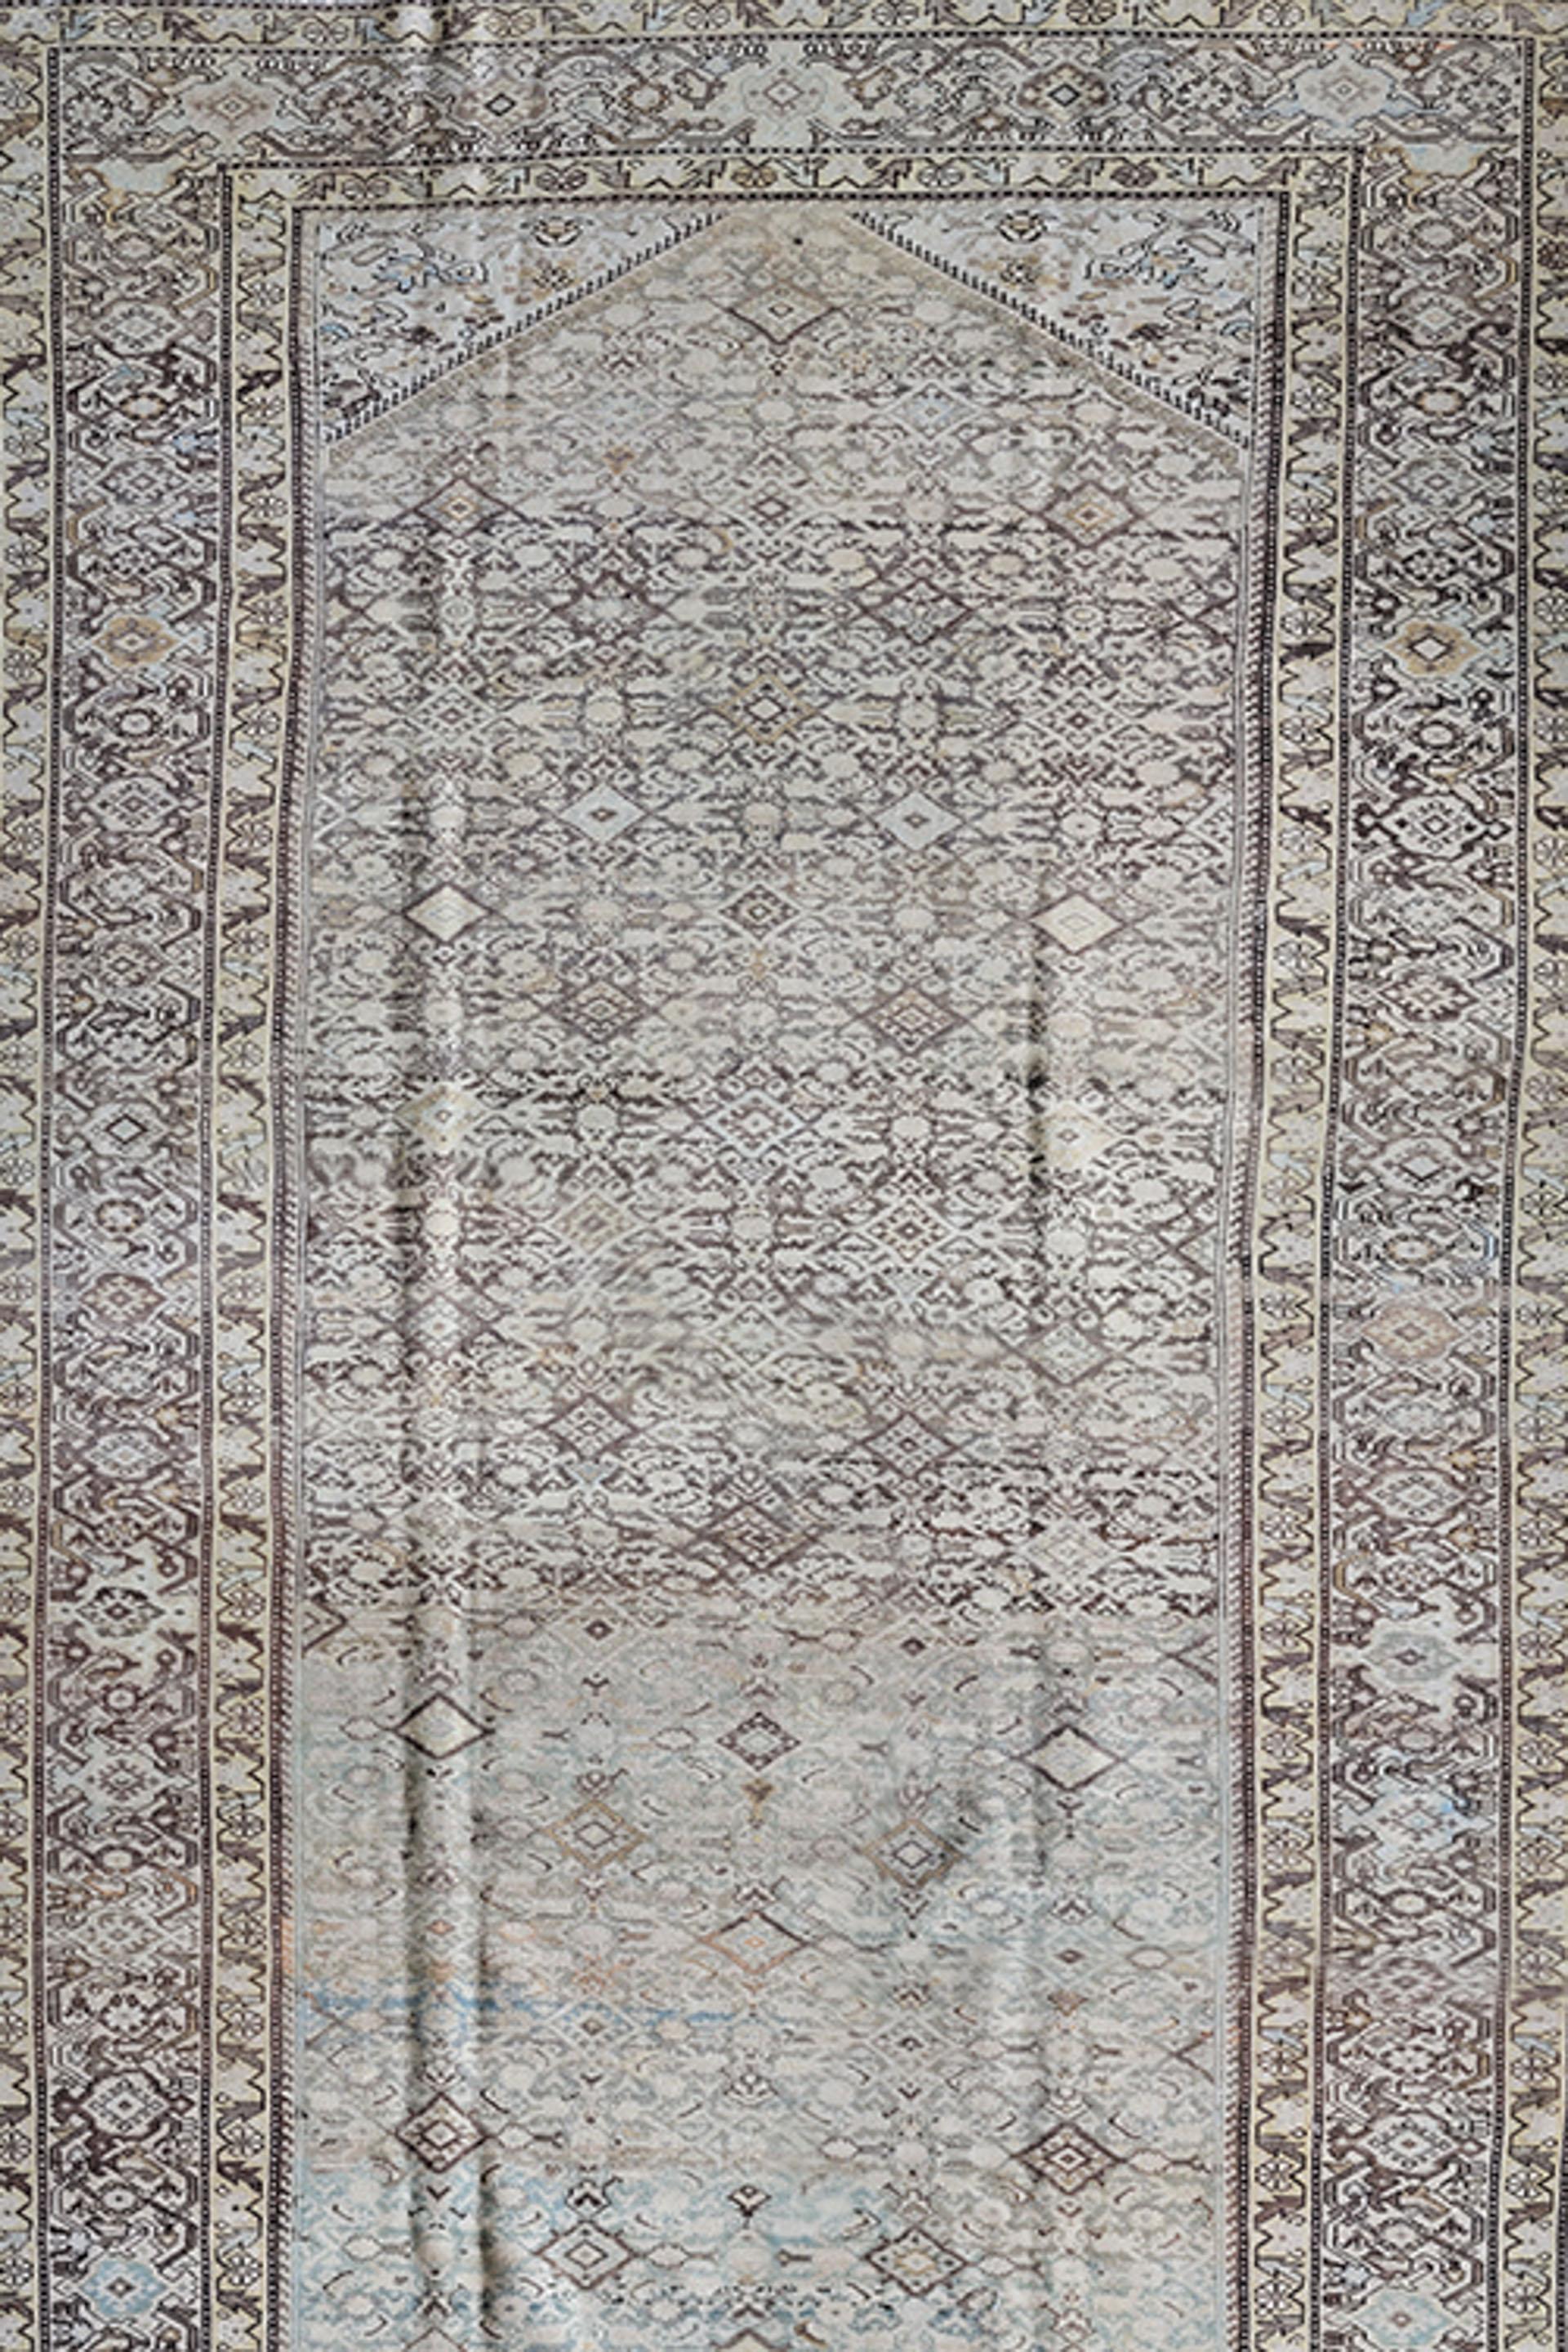 Other Antique Persian Mahal Rug For Sale